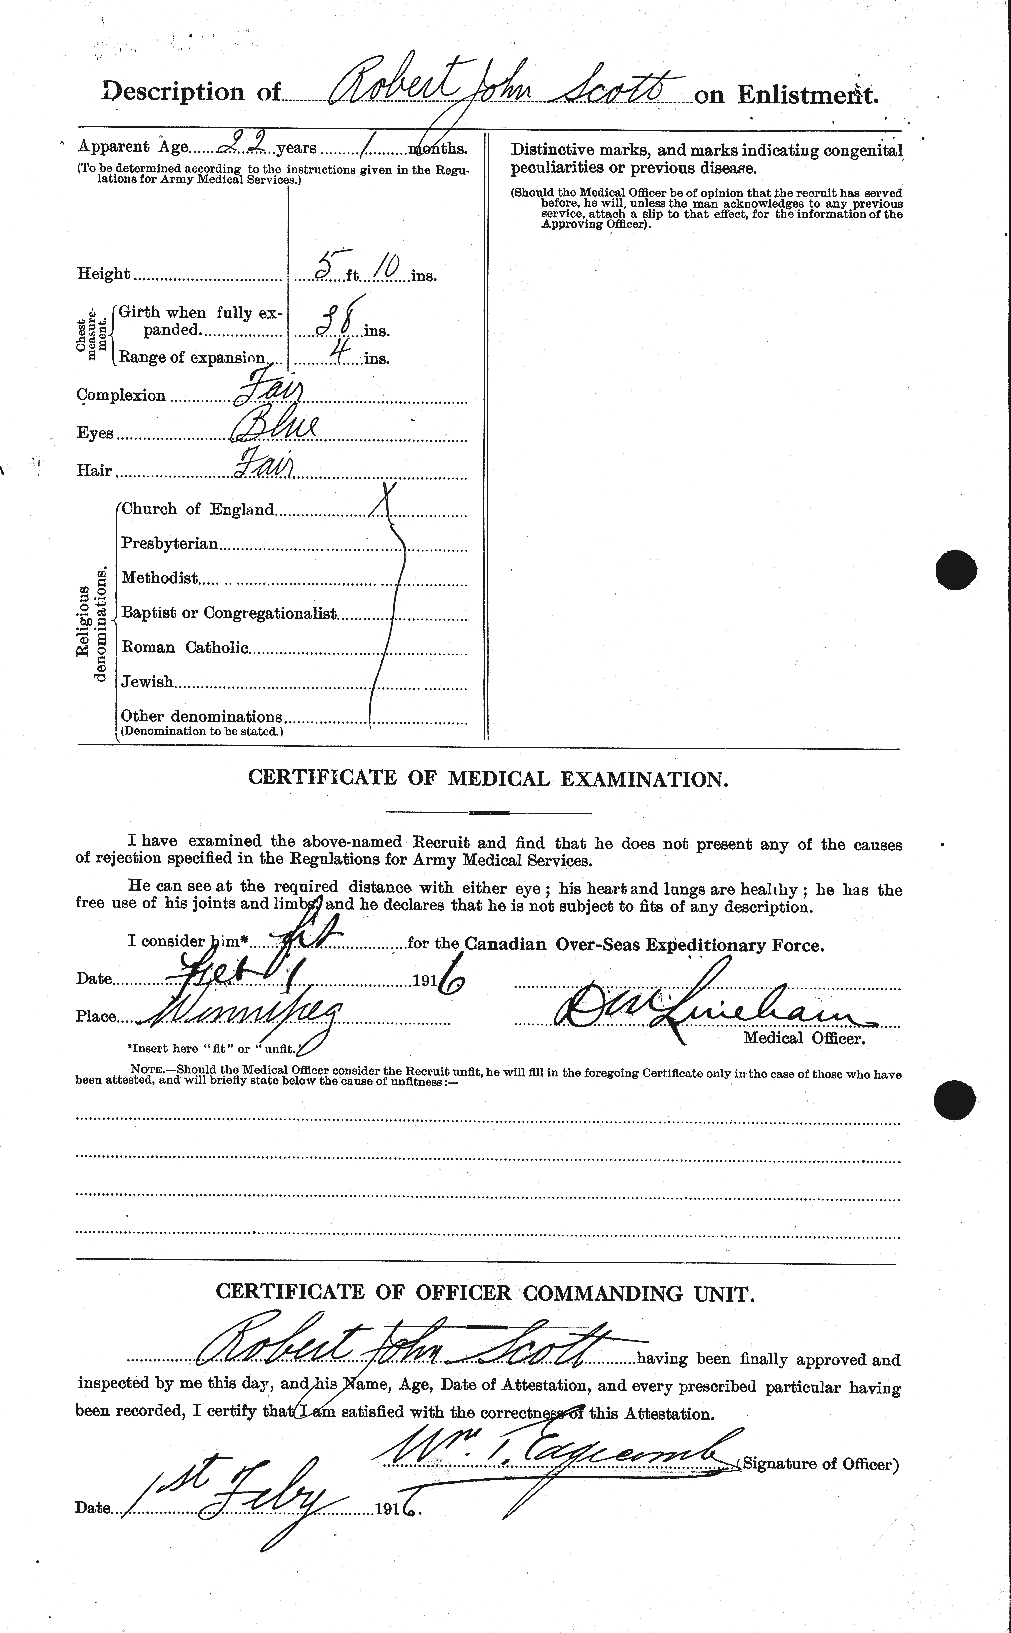 Personnel Records of the First World War - CEF 089129b